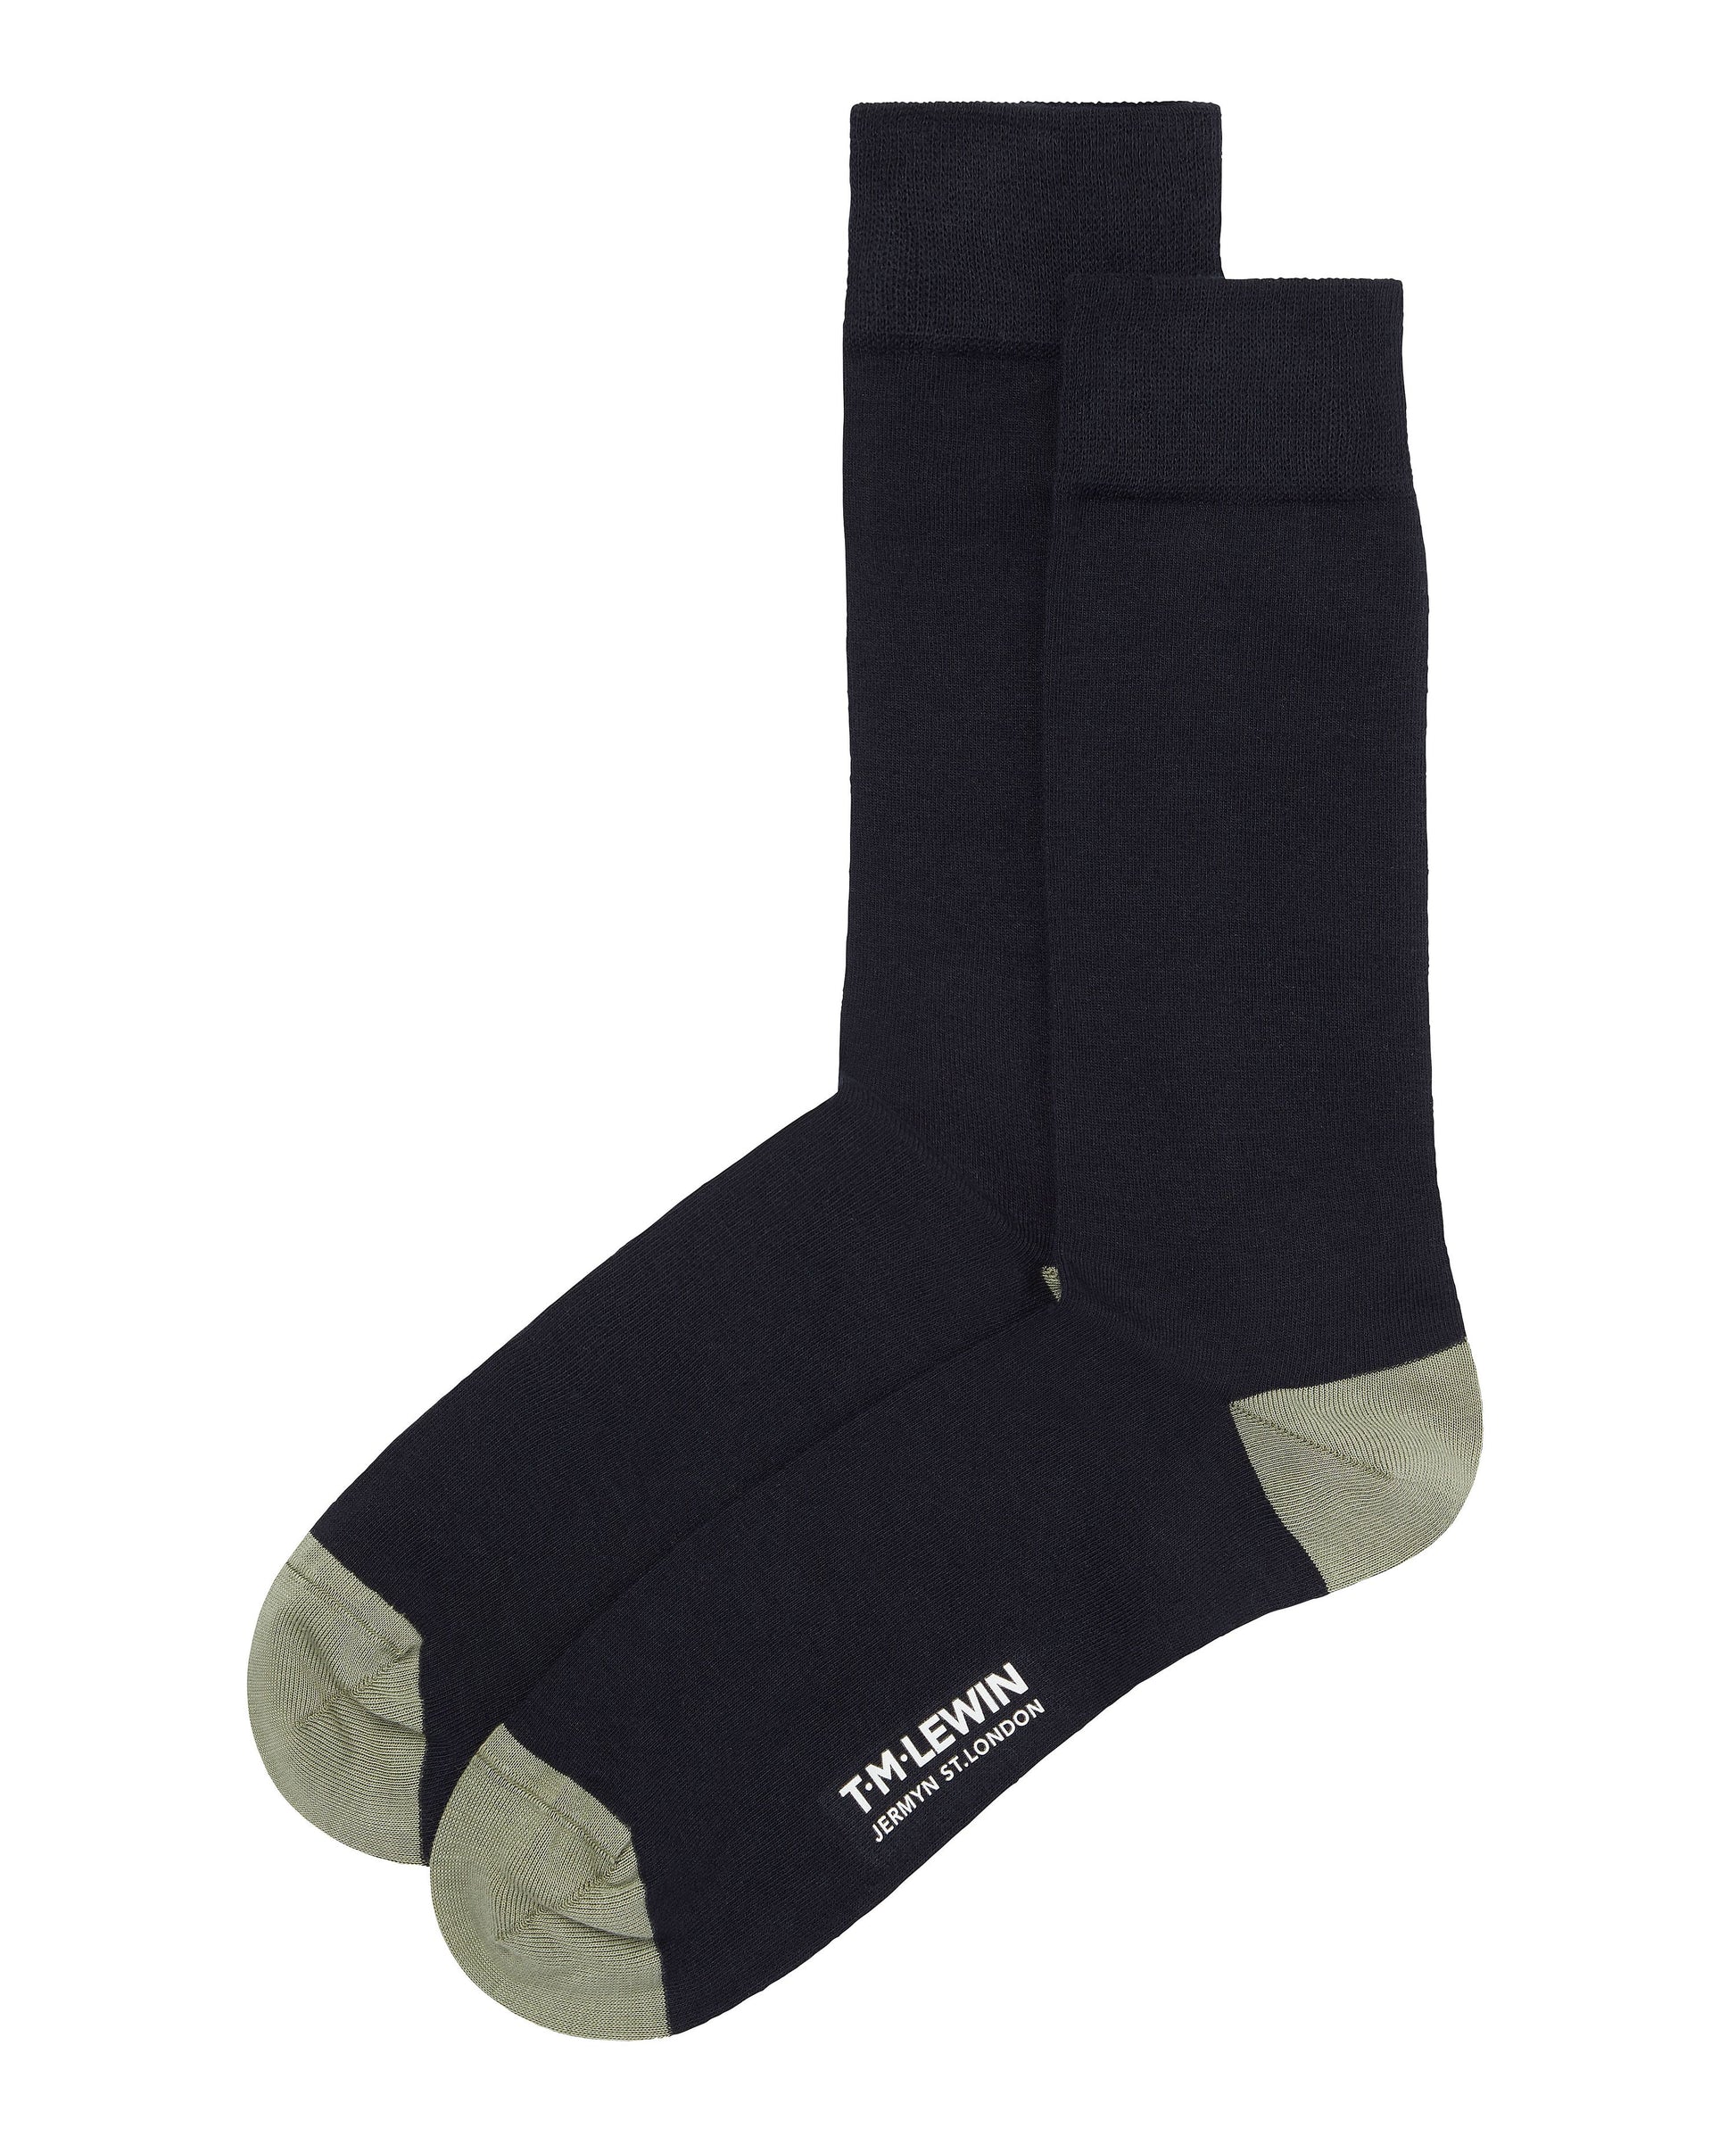 Image 5 of Navy Contrast Heel and Toe 5 Pack Sock Set